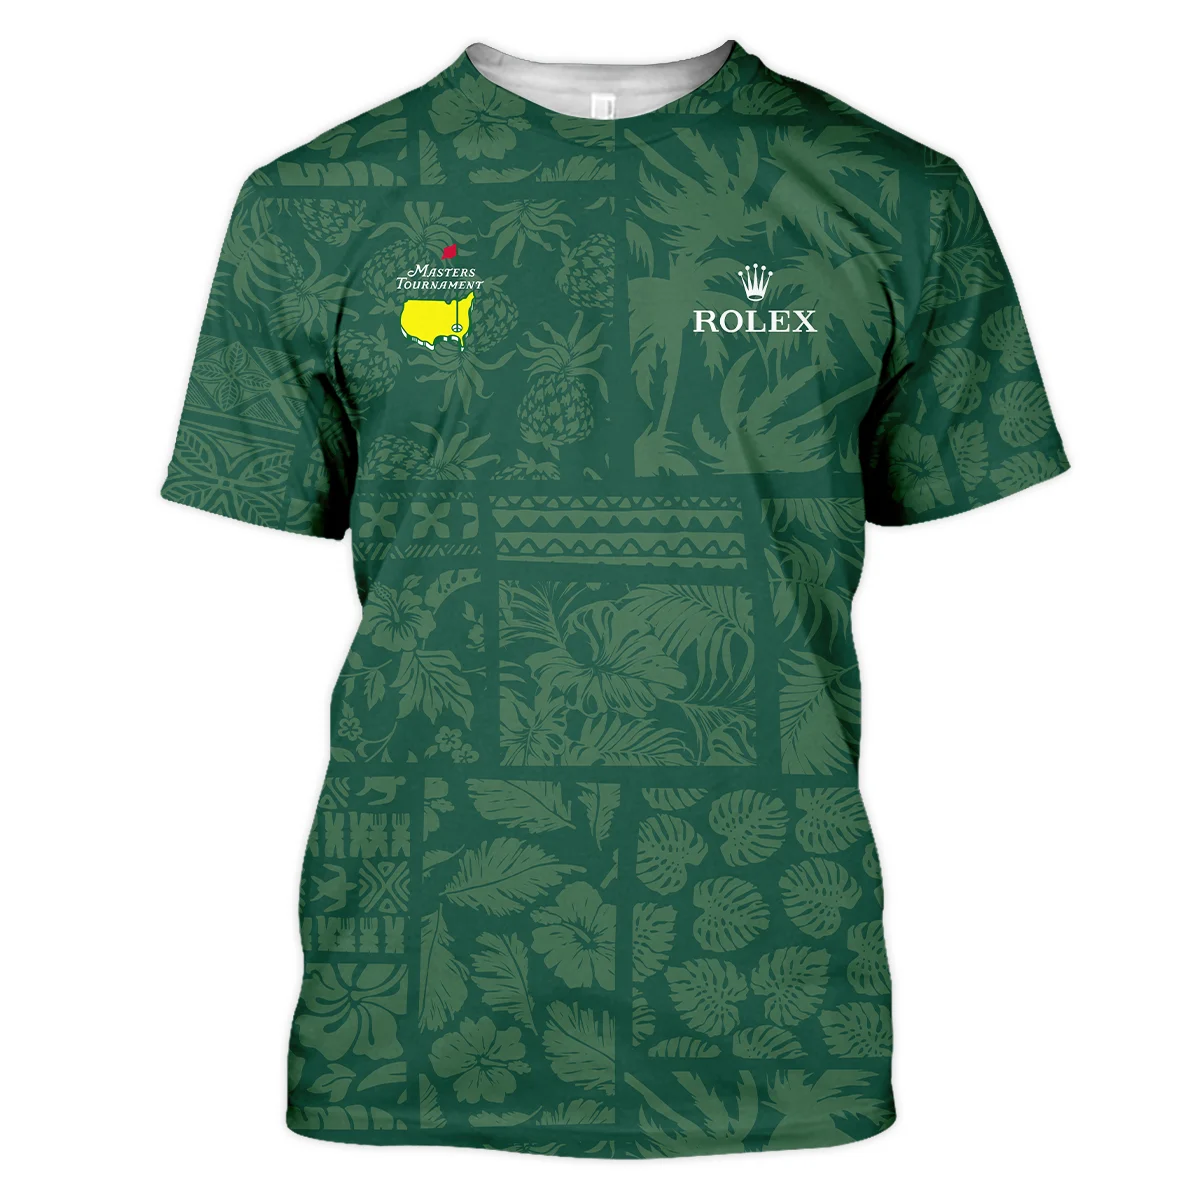 Masters Tournament Rolex Hawaiian Style Fabric Patchwork Unisex T-Shirt Style Classic T-Shirt